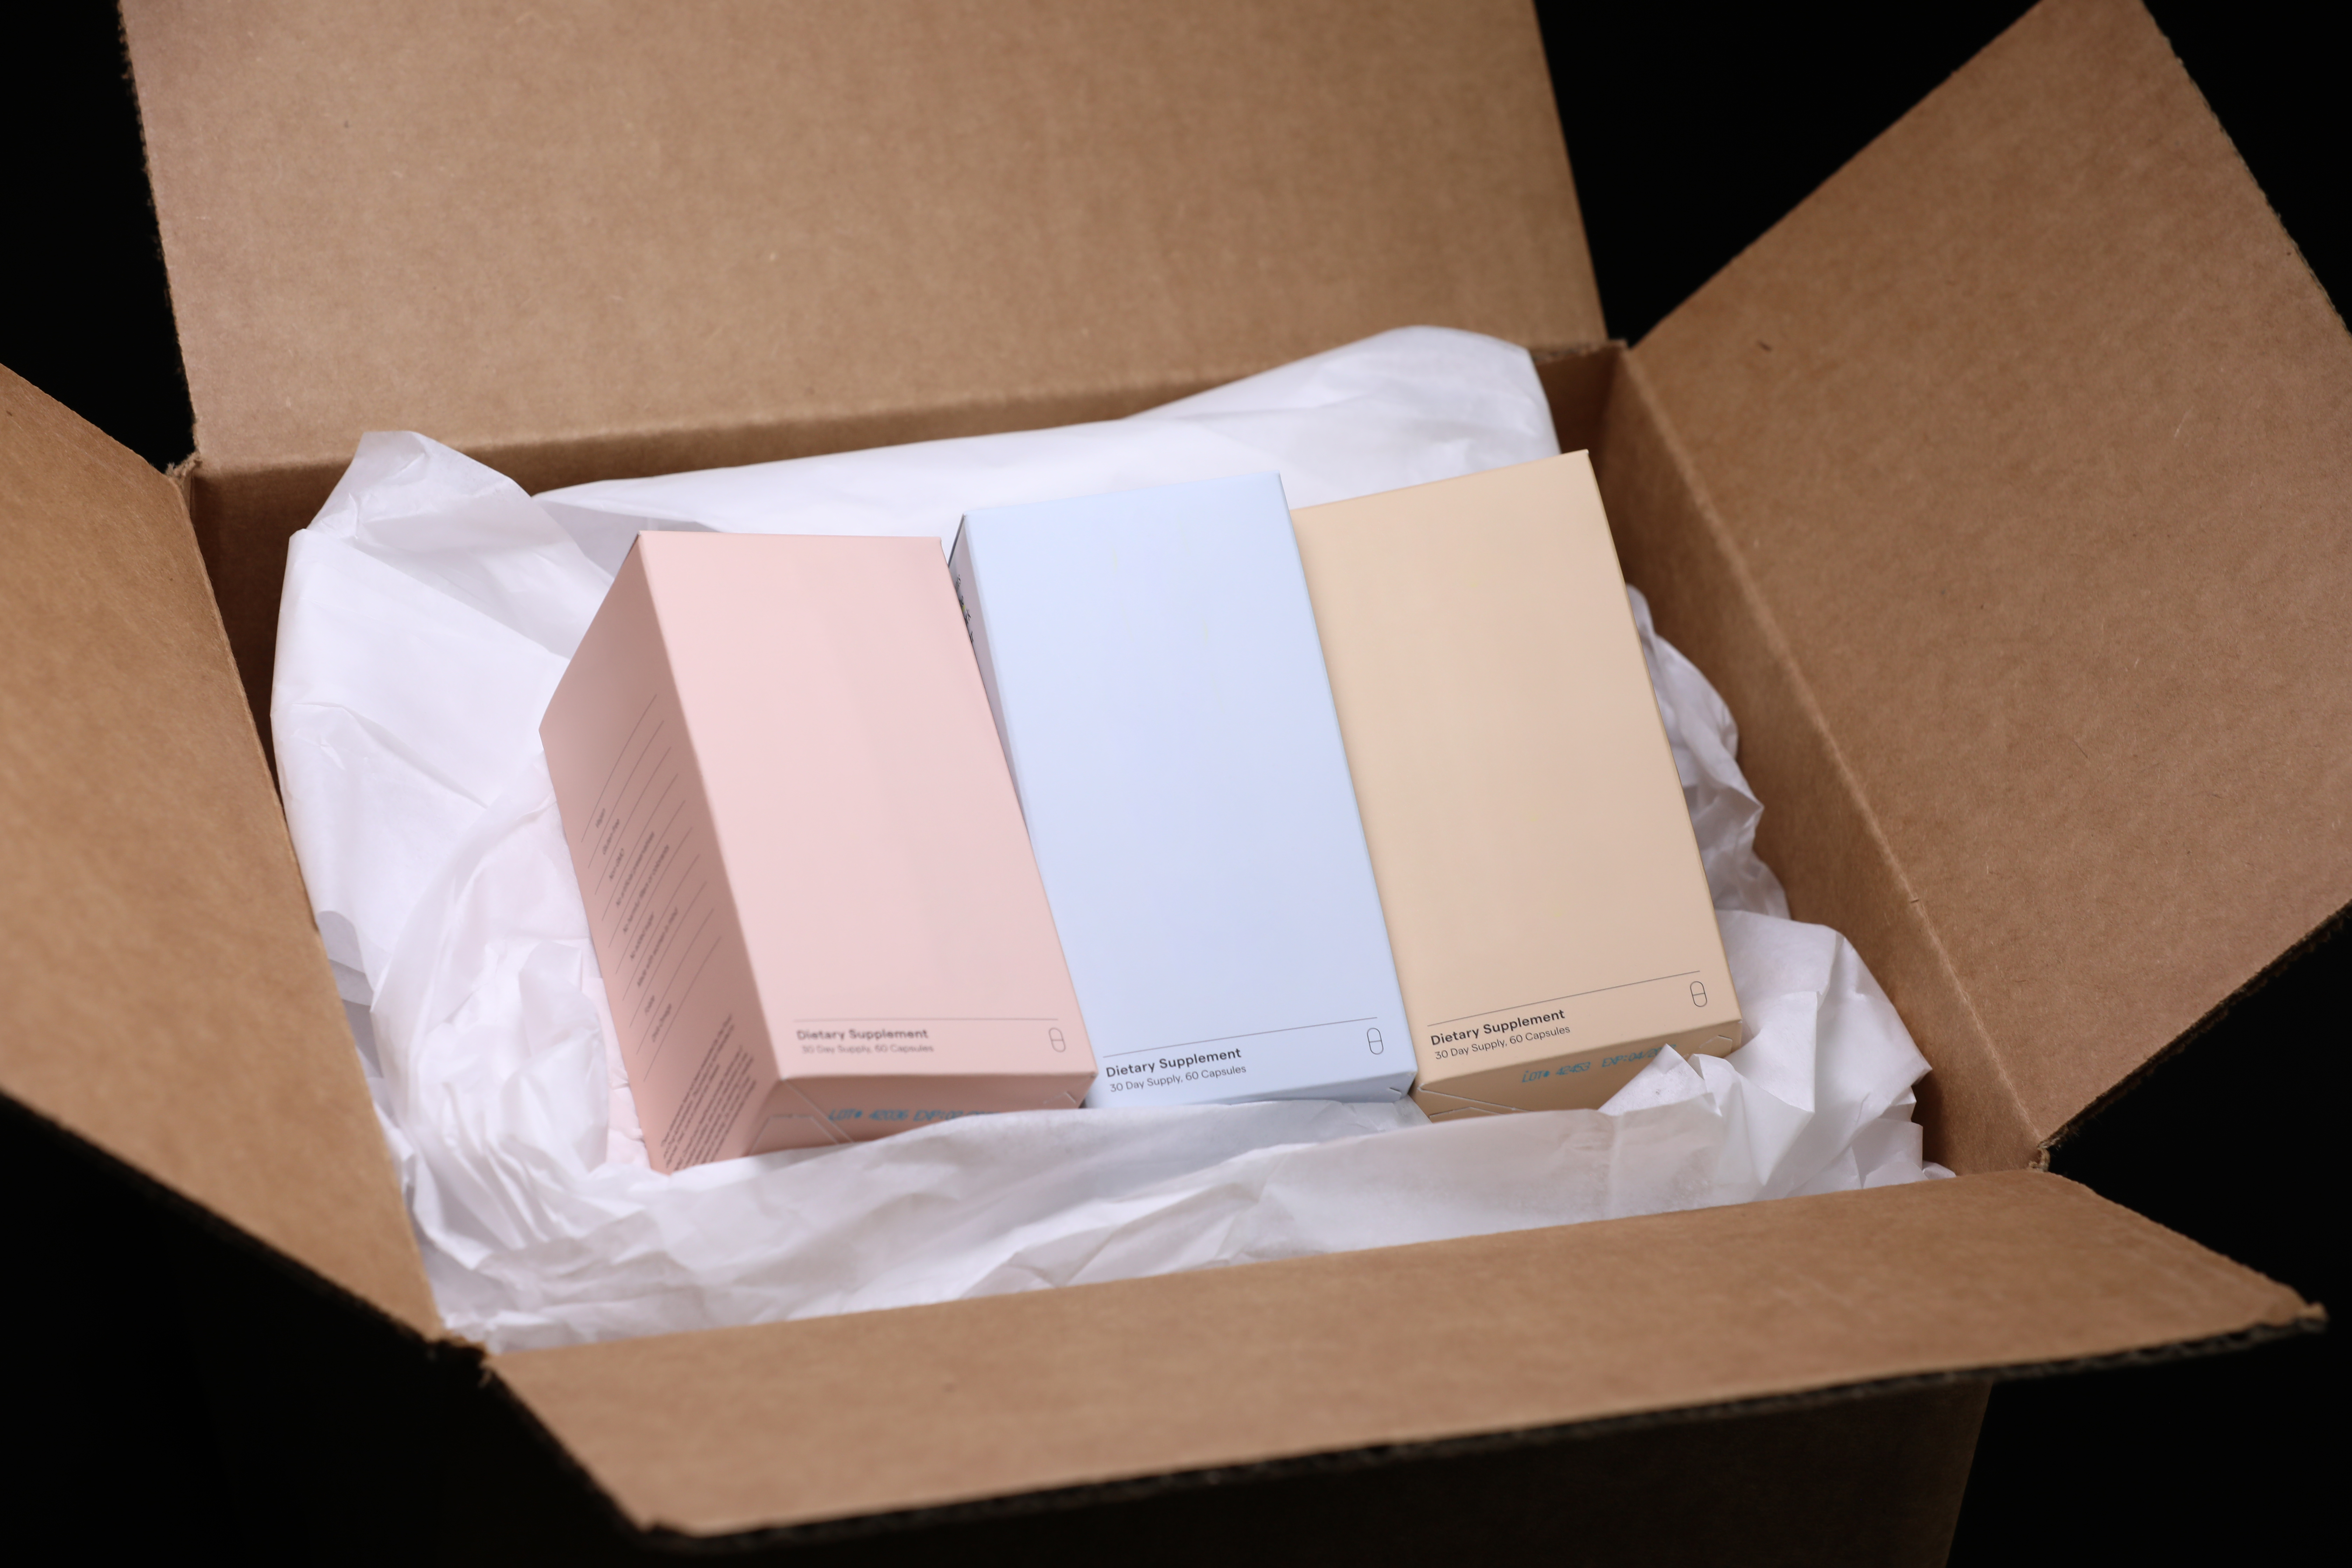 Inspyre white paper is used for void fill inside box packaging.